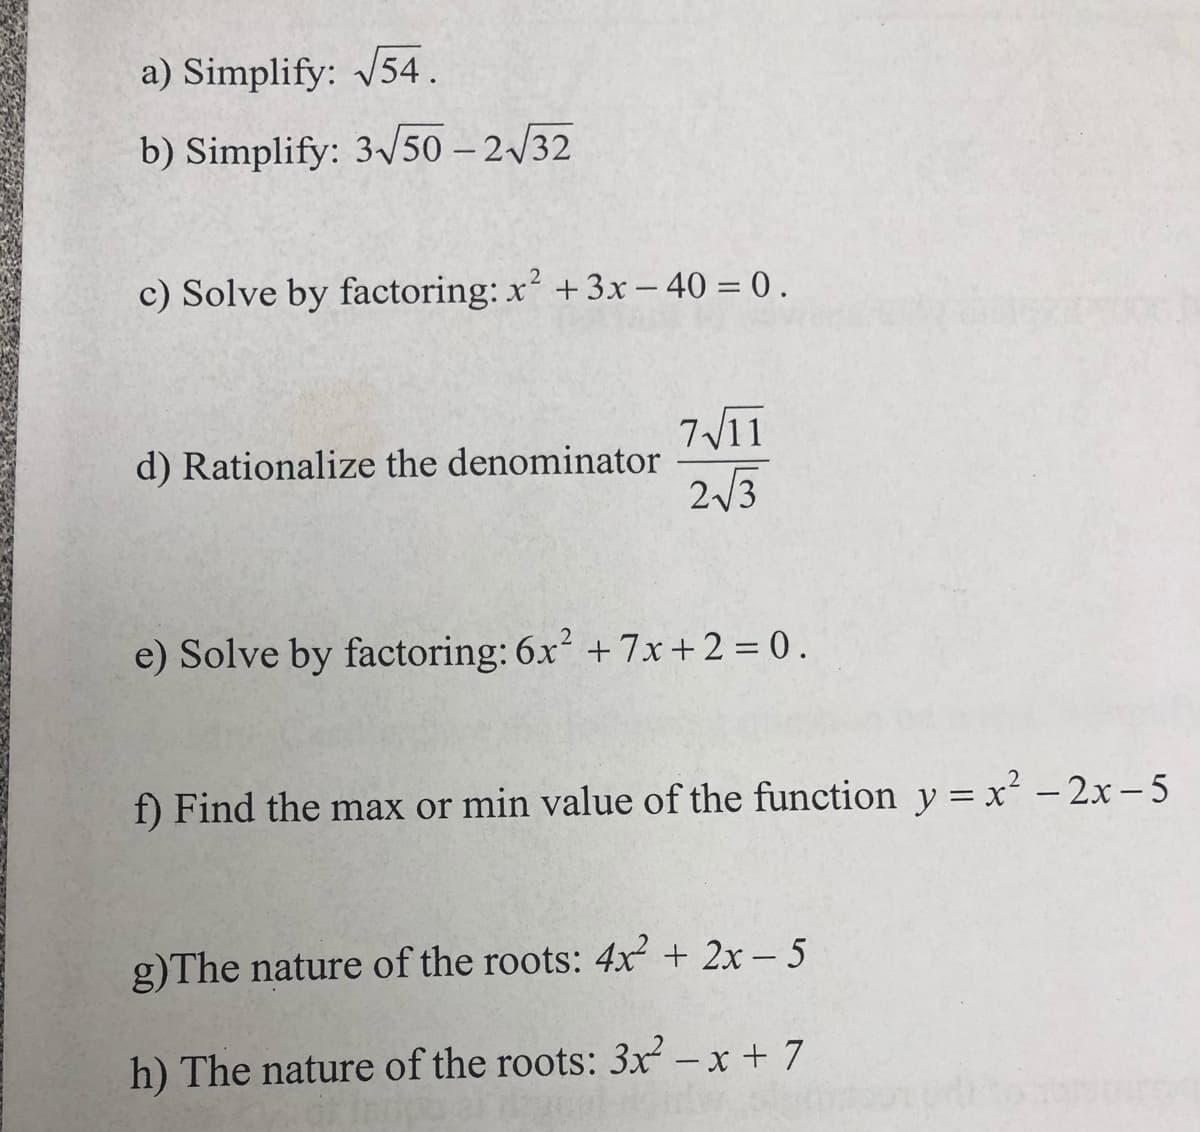 a) Simplify: 54.
b) Simplify: 3v50 – 2/32
c) Solve by factoring: x +3x – 40 = 0 .
7V11
d) Rationalize the denominator
2/3
e) Solve by factoring: 6x + 7x+2 = 0.
f) Find the max or min value of the function y = x - 2x – 5
g)The nature of the roots: 4x + 2x – 5
h) The nature of the roots: 3x – x + 7
